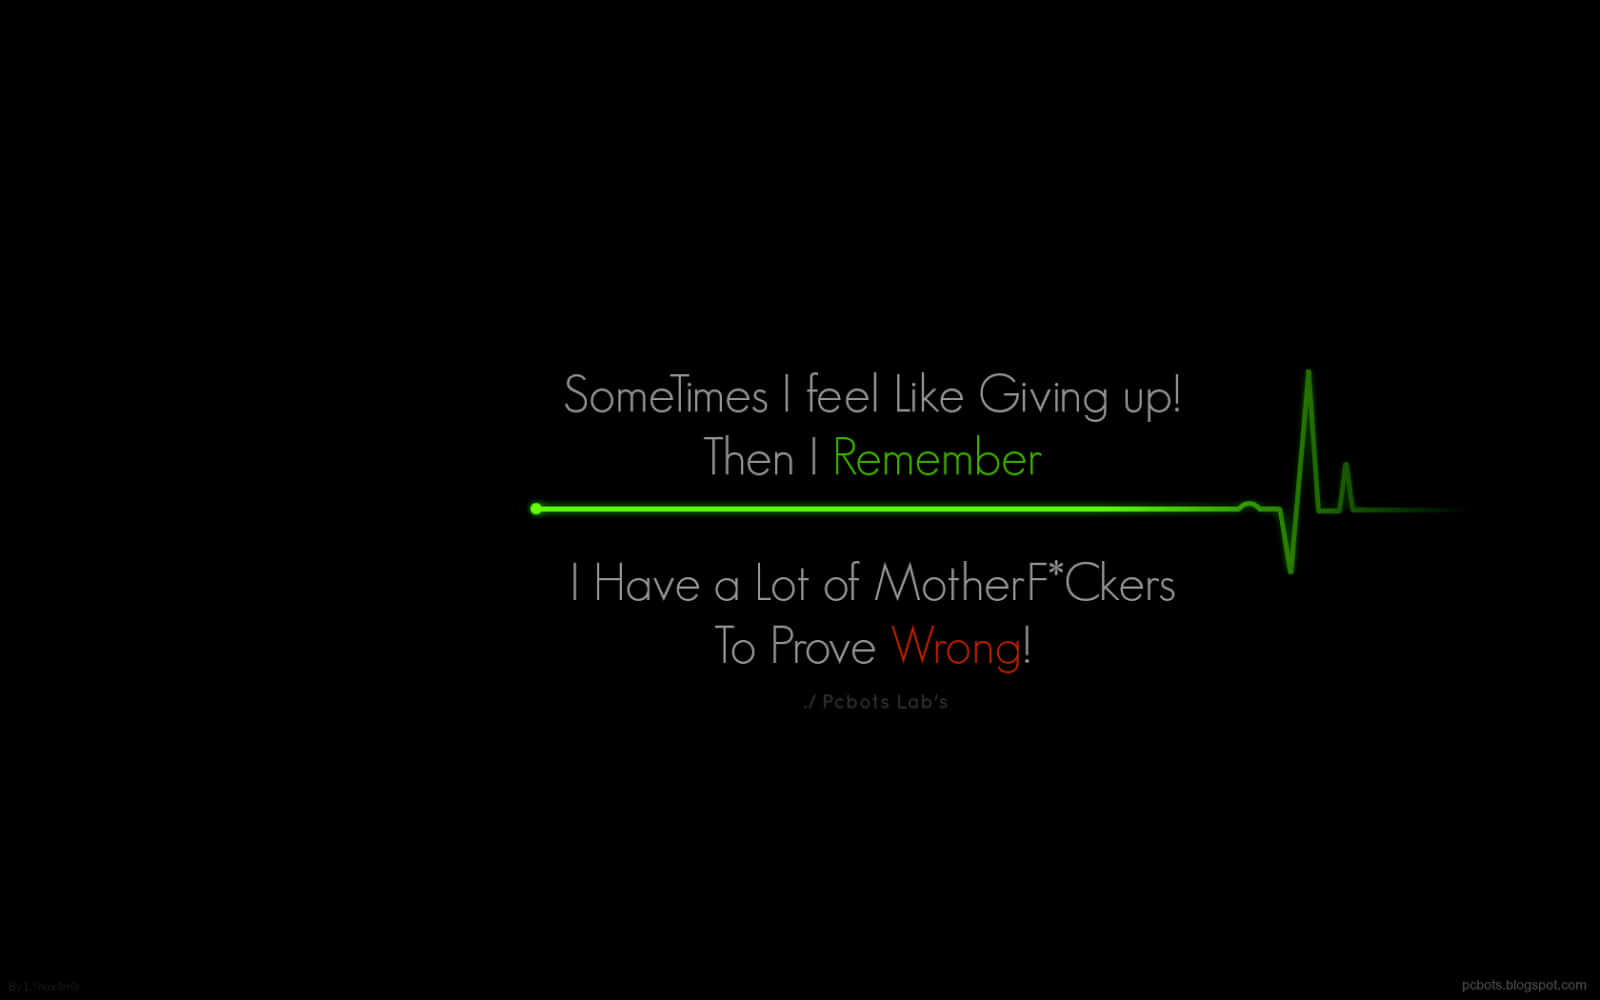 Sure Proving Wrong Quote Wallpaper